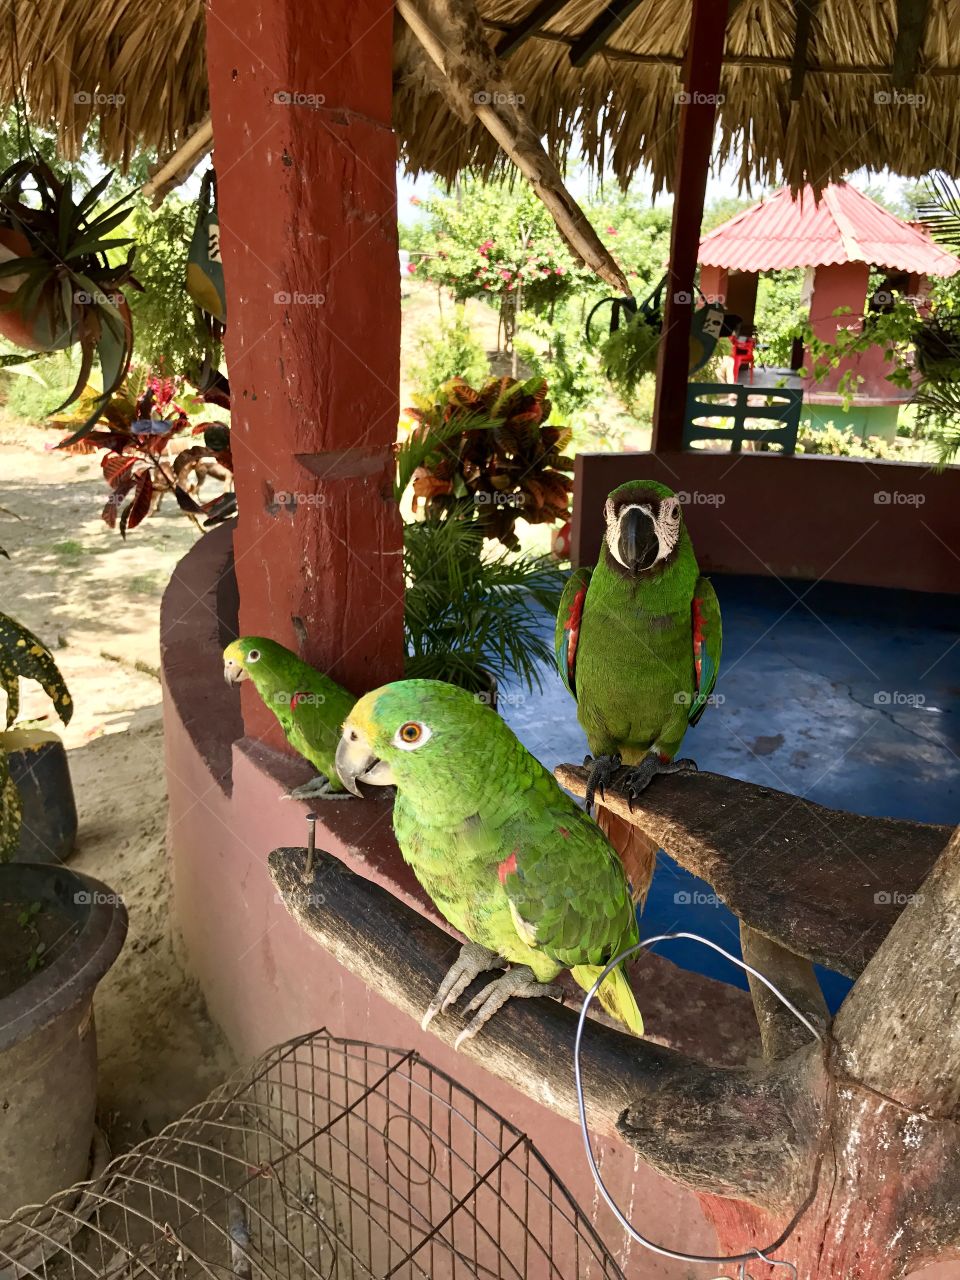 Parrots on a farm in Colombia